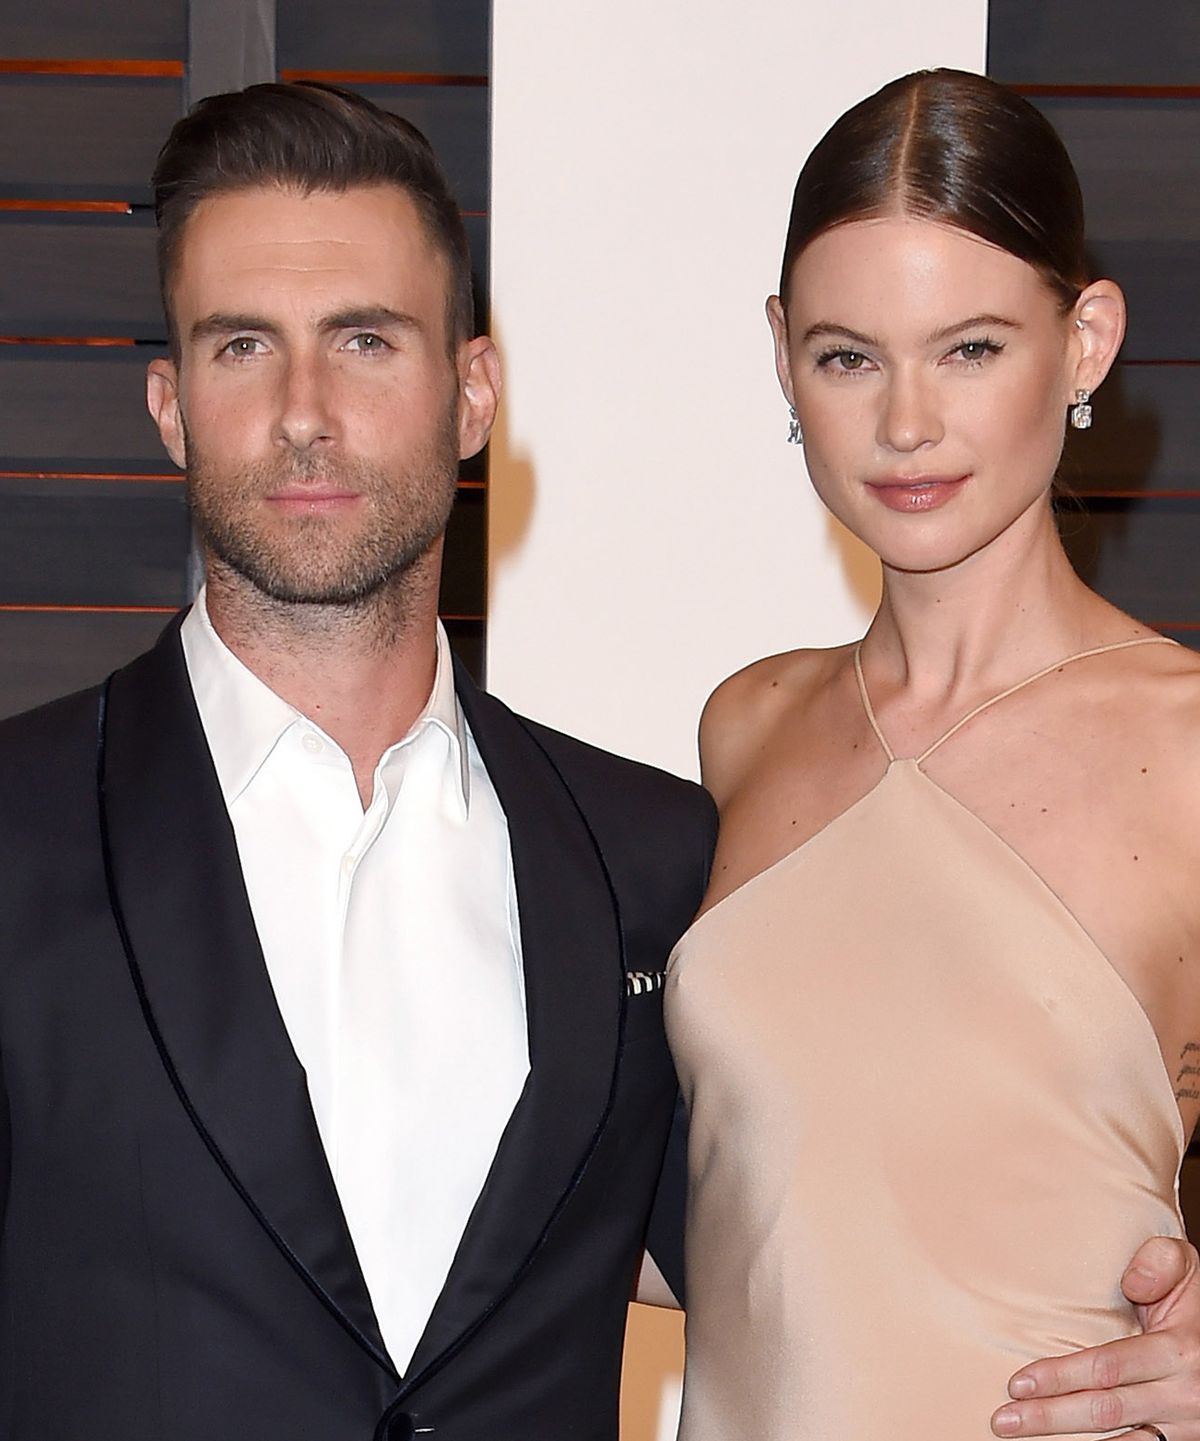 Model Behati Prinsloo and musician Adam Levine arrive at the 2015 Vanity Fair Oscar Party Hosted By Graydon Carter at Wallis Annenberg Center for the Performing Arts on February 22, 2015 in Beverly Hills, California.